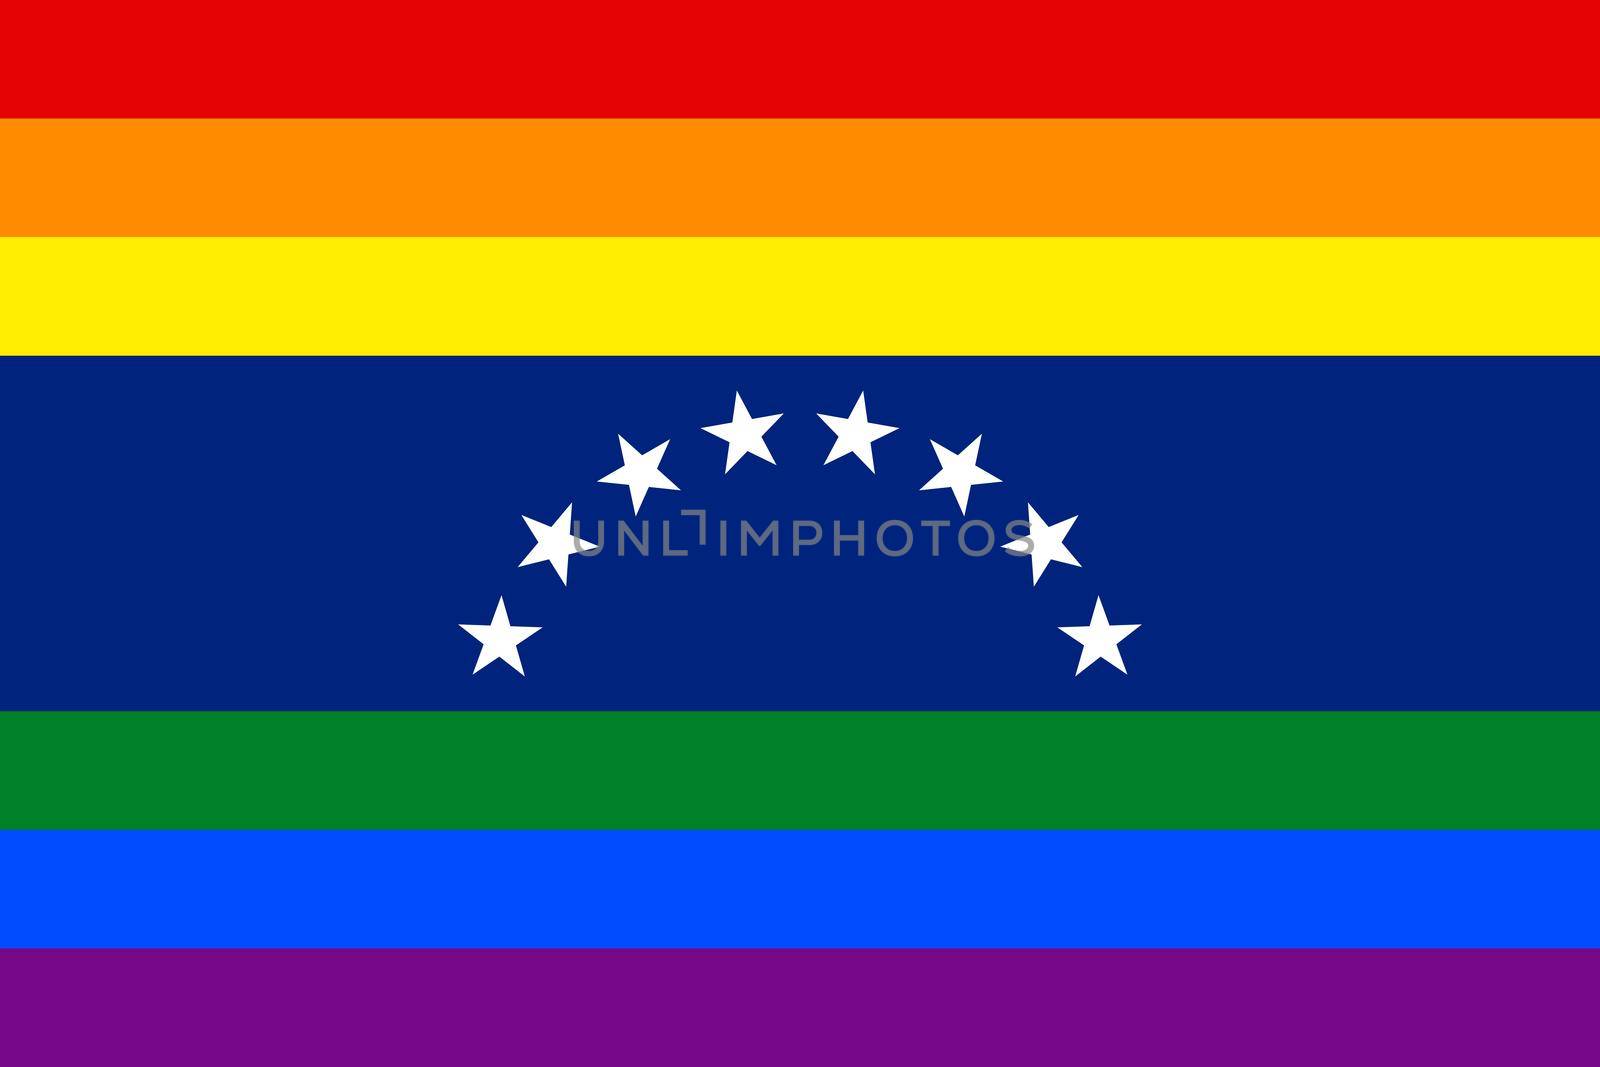 Top view of flag of Venezuela, Gay Pride, no flagpole. Plane design, layout. Flag background. Freedom and love concept. Pride month, activism, community and freedom